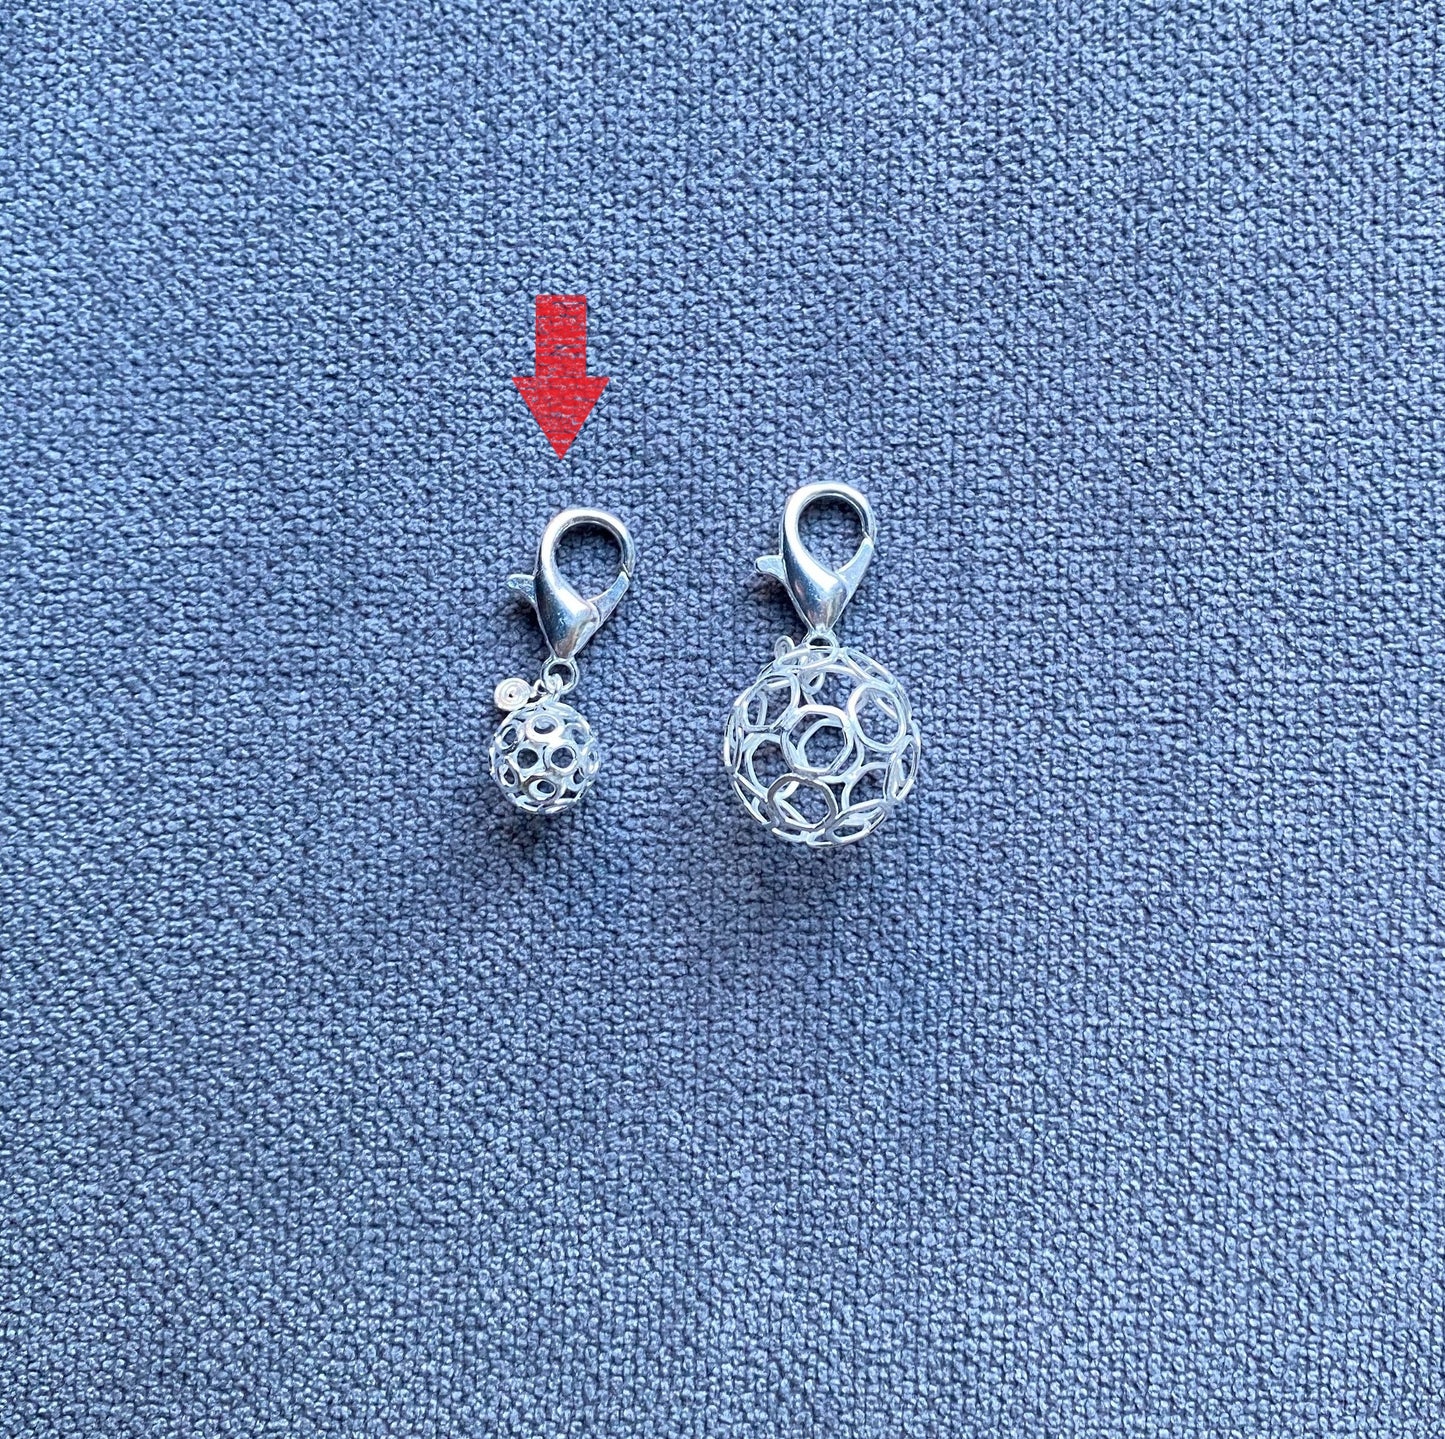 Pair with Pets: Soccer/Football Charm and Earrings (Small)